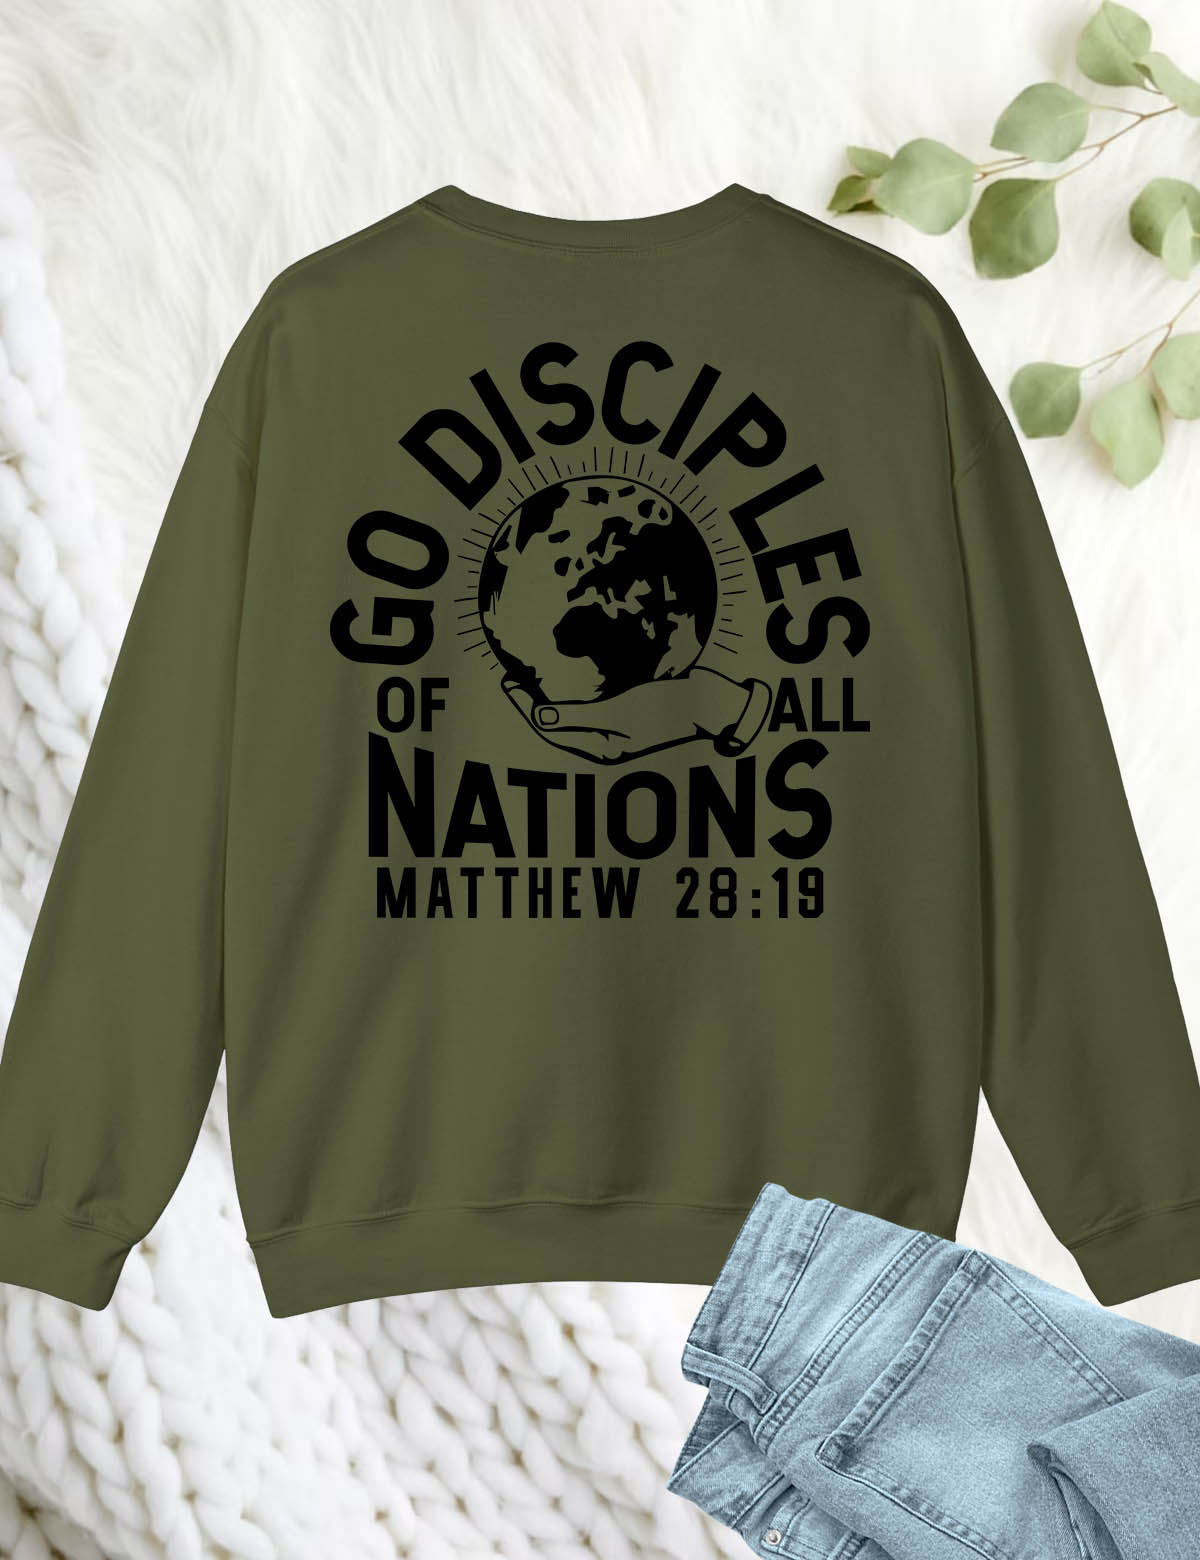 Go And Make Disciples Of All Nations Bible Verse Sweatshirt